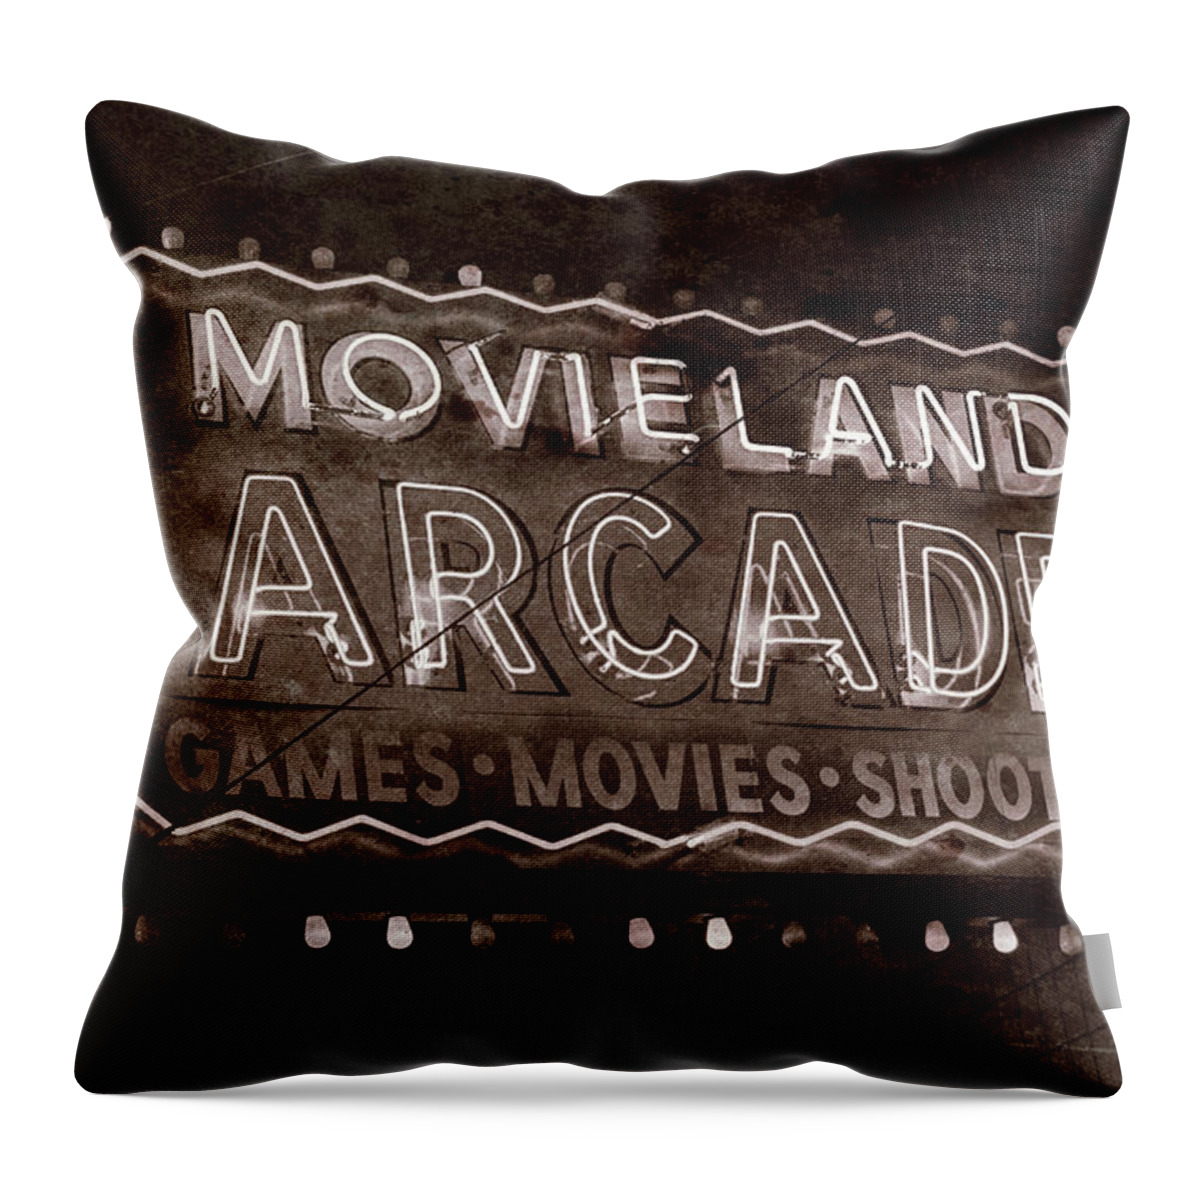 Movieland Throw Pillow featuring the photograph Movieland Arcade - Gritty by Stephen Stookey